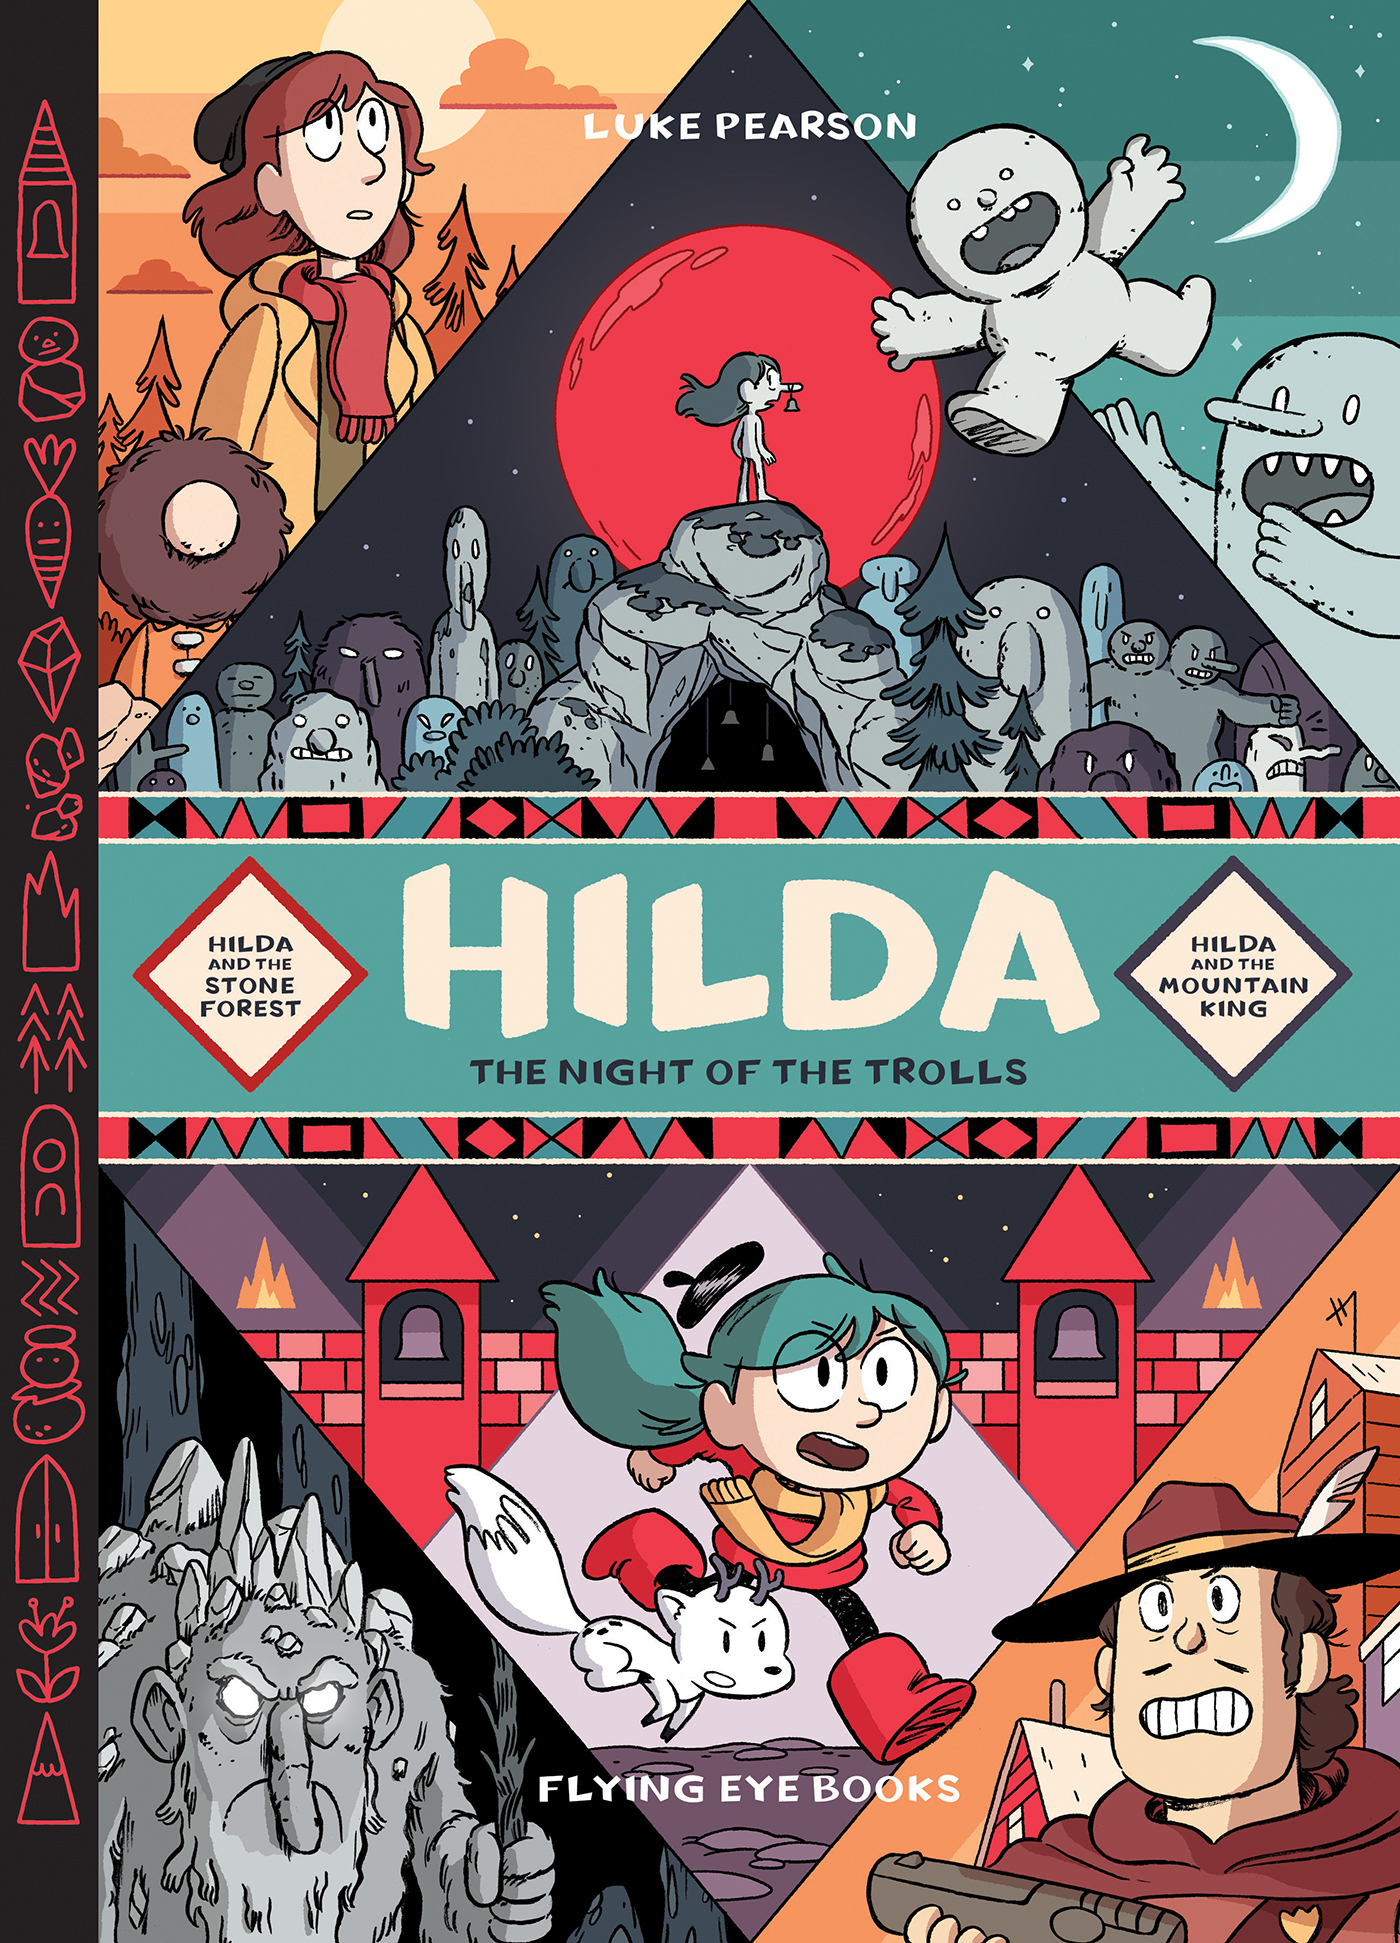 Hilda Night of the Trolls Hardcover (Hilda And The Stone Forest / Hilda And The Mountain King)